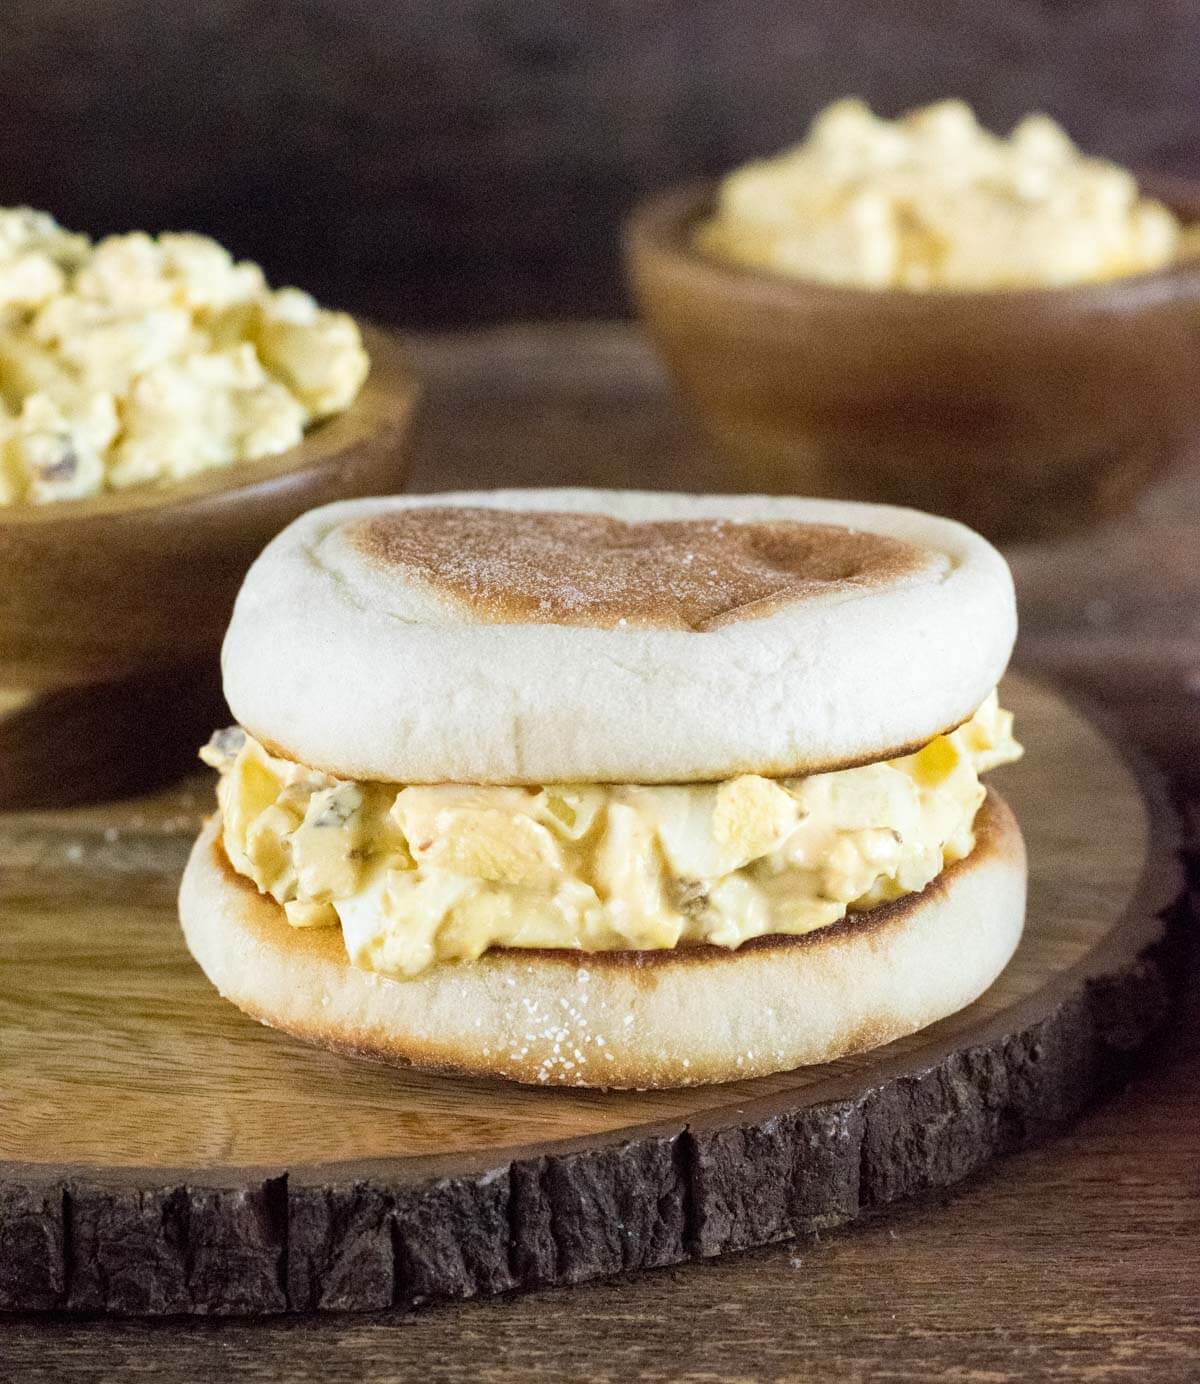 Spicy Egg Salad sandwich on English muffin.